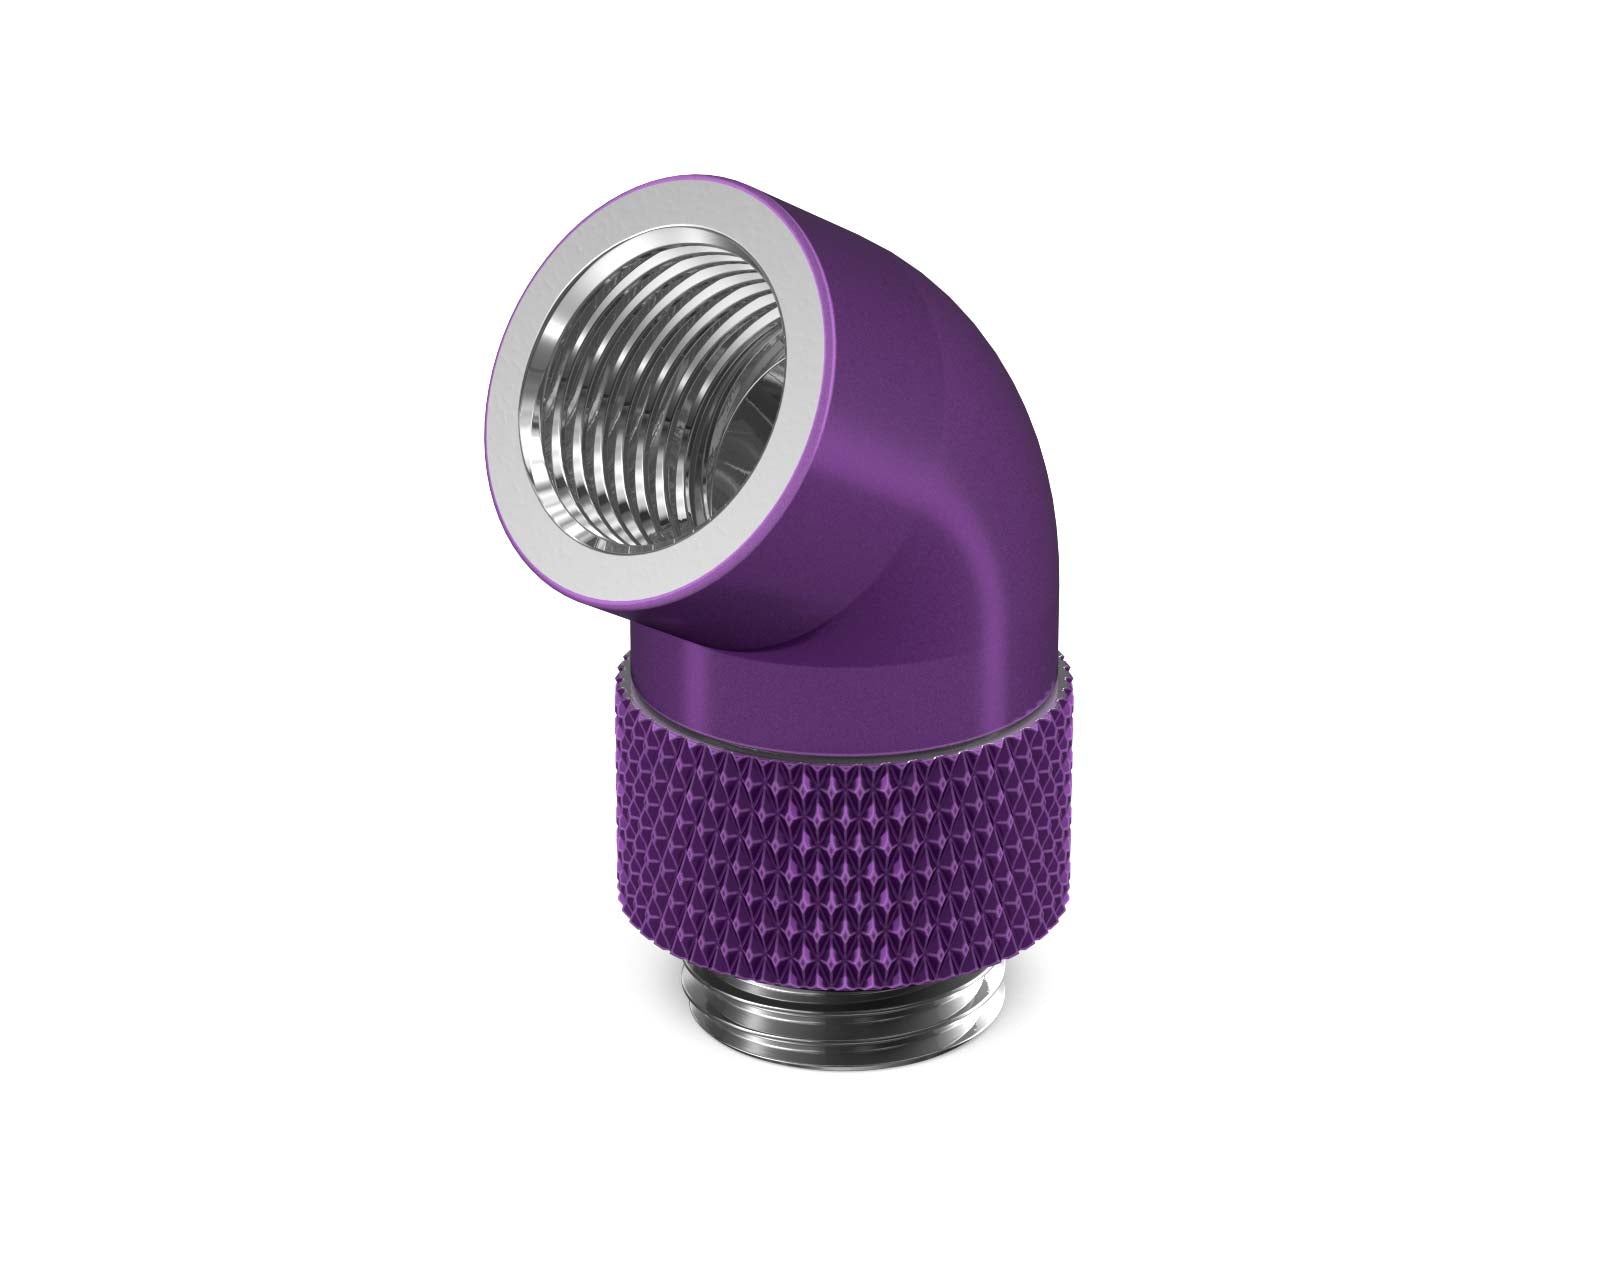 PrimoChill Male to Female G 1/4in. 60 Degree SX Rotary Elbow Fitting - PrimoChill - KEEPING IT COOL Candy Purple